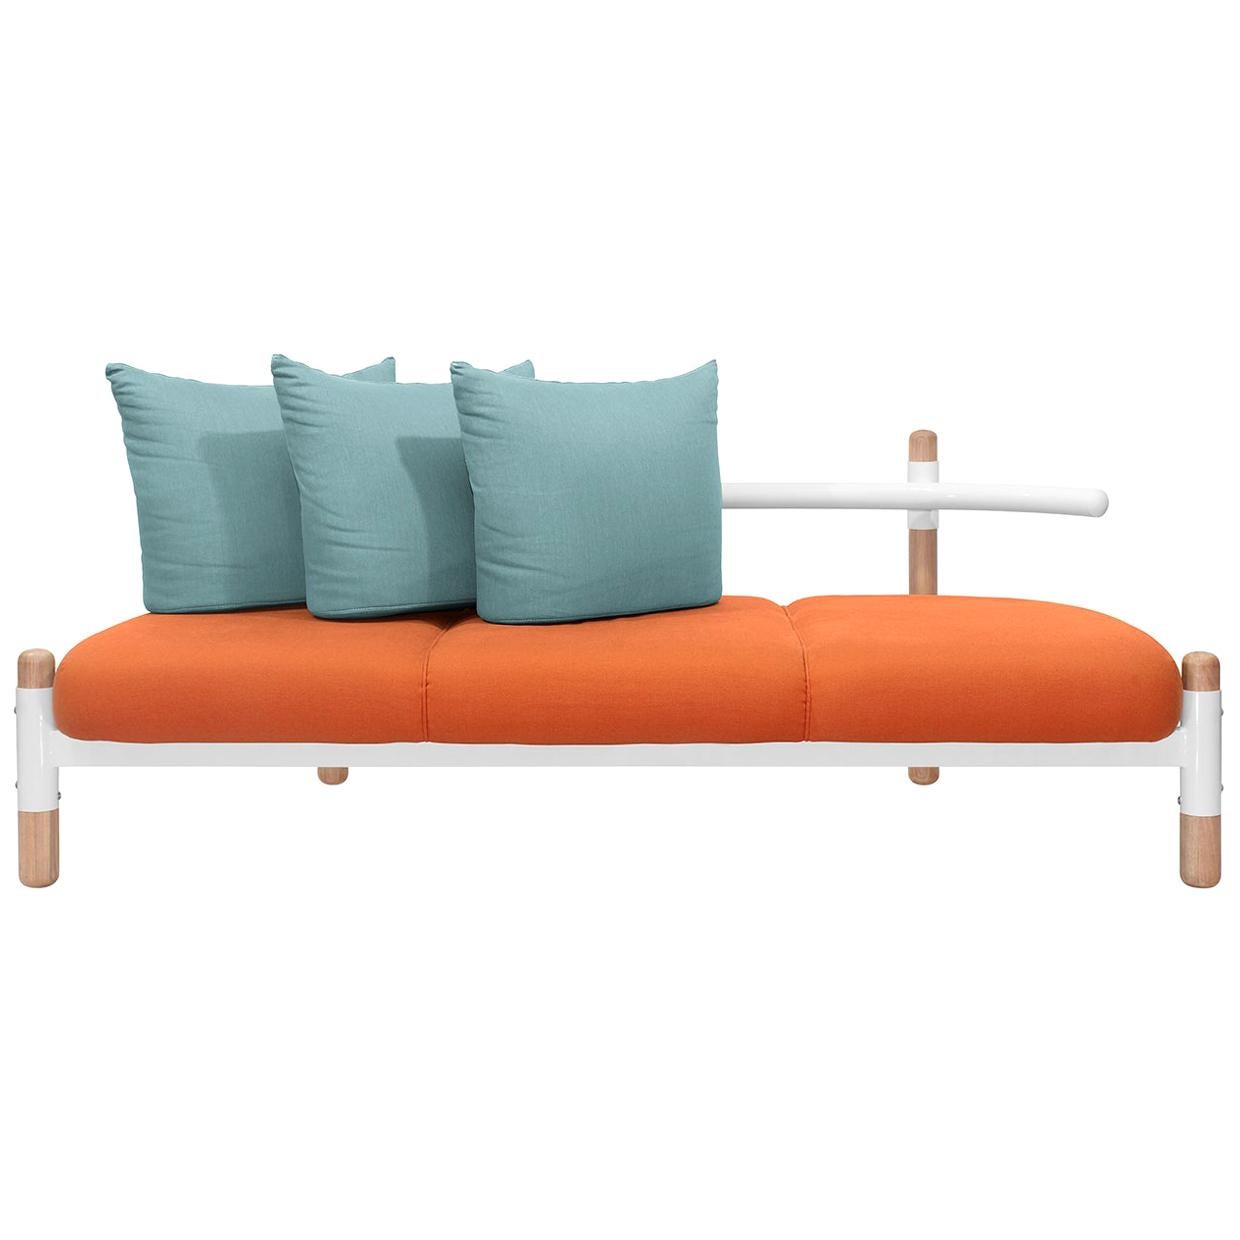 Tomato PK15 Three-Seat Sofa, Carbon Steel Structure & Wood Legs by Paulo Kobylka For Sale